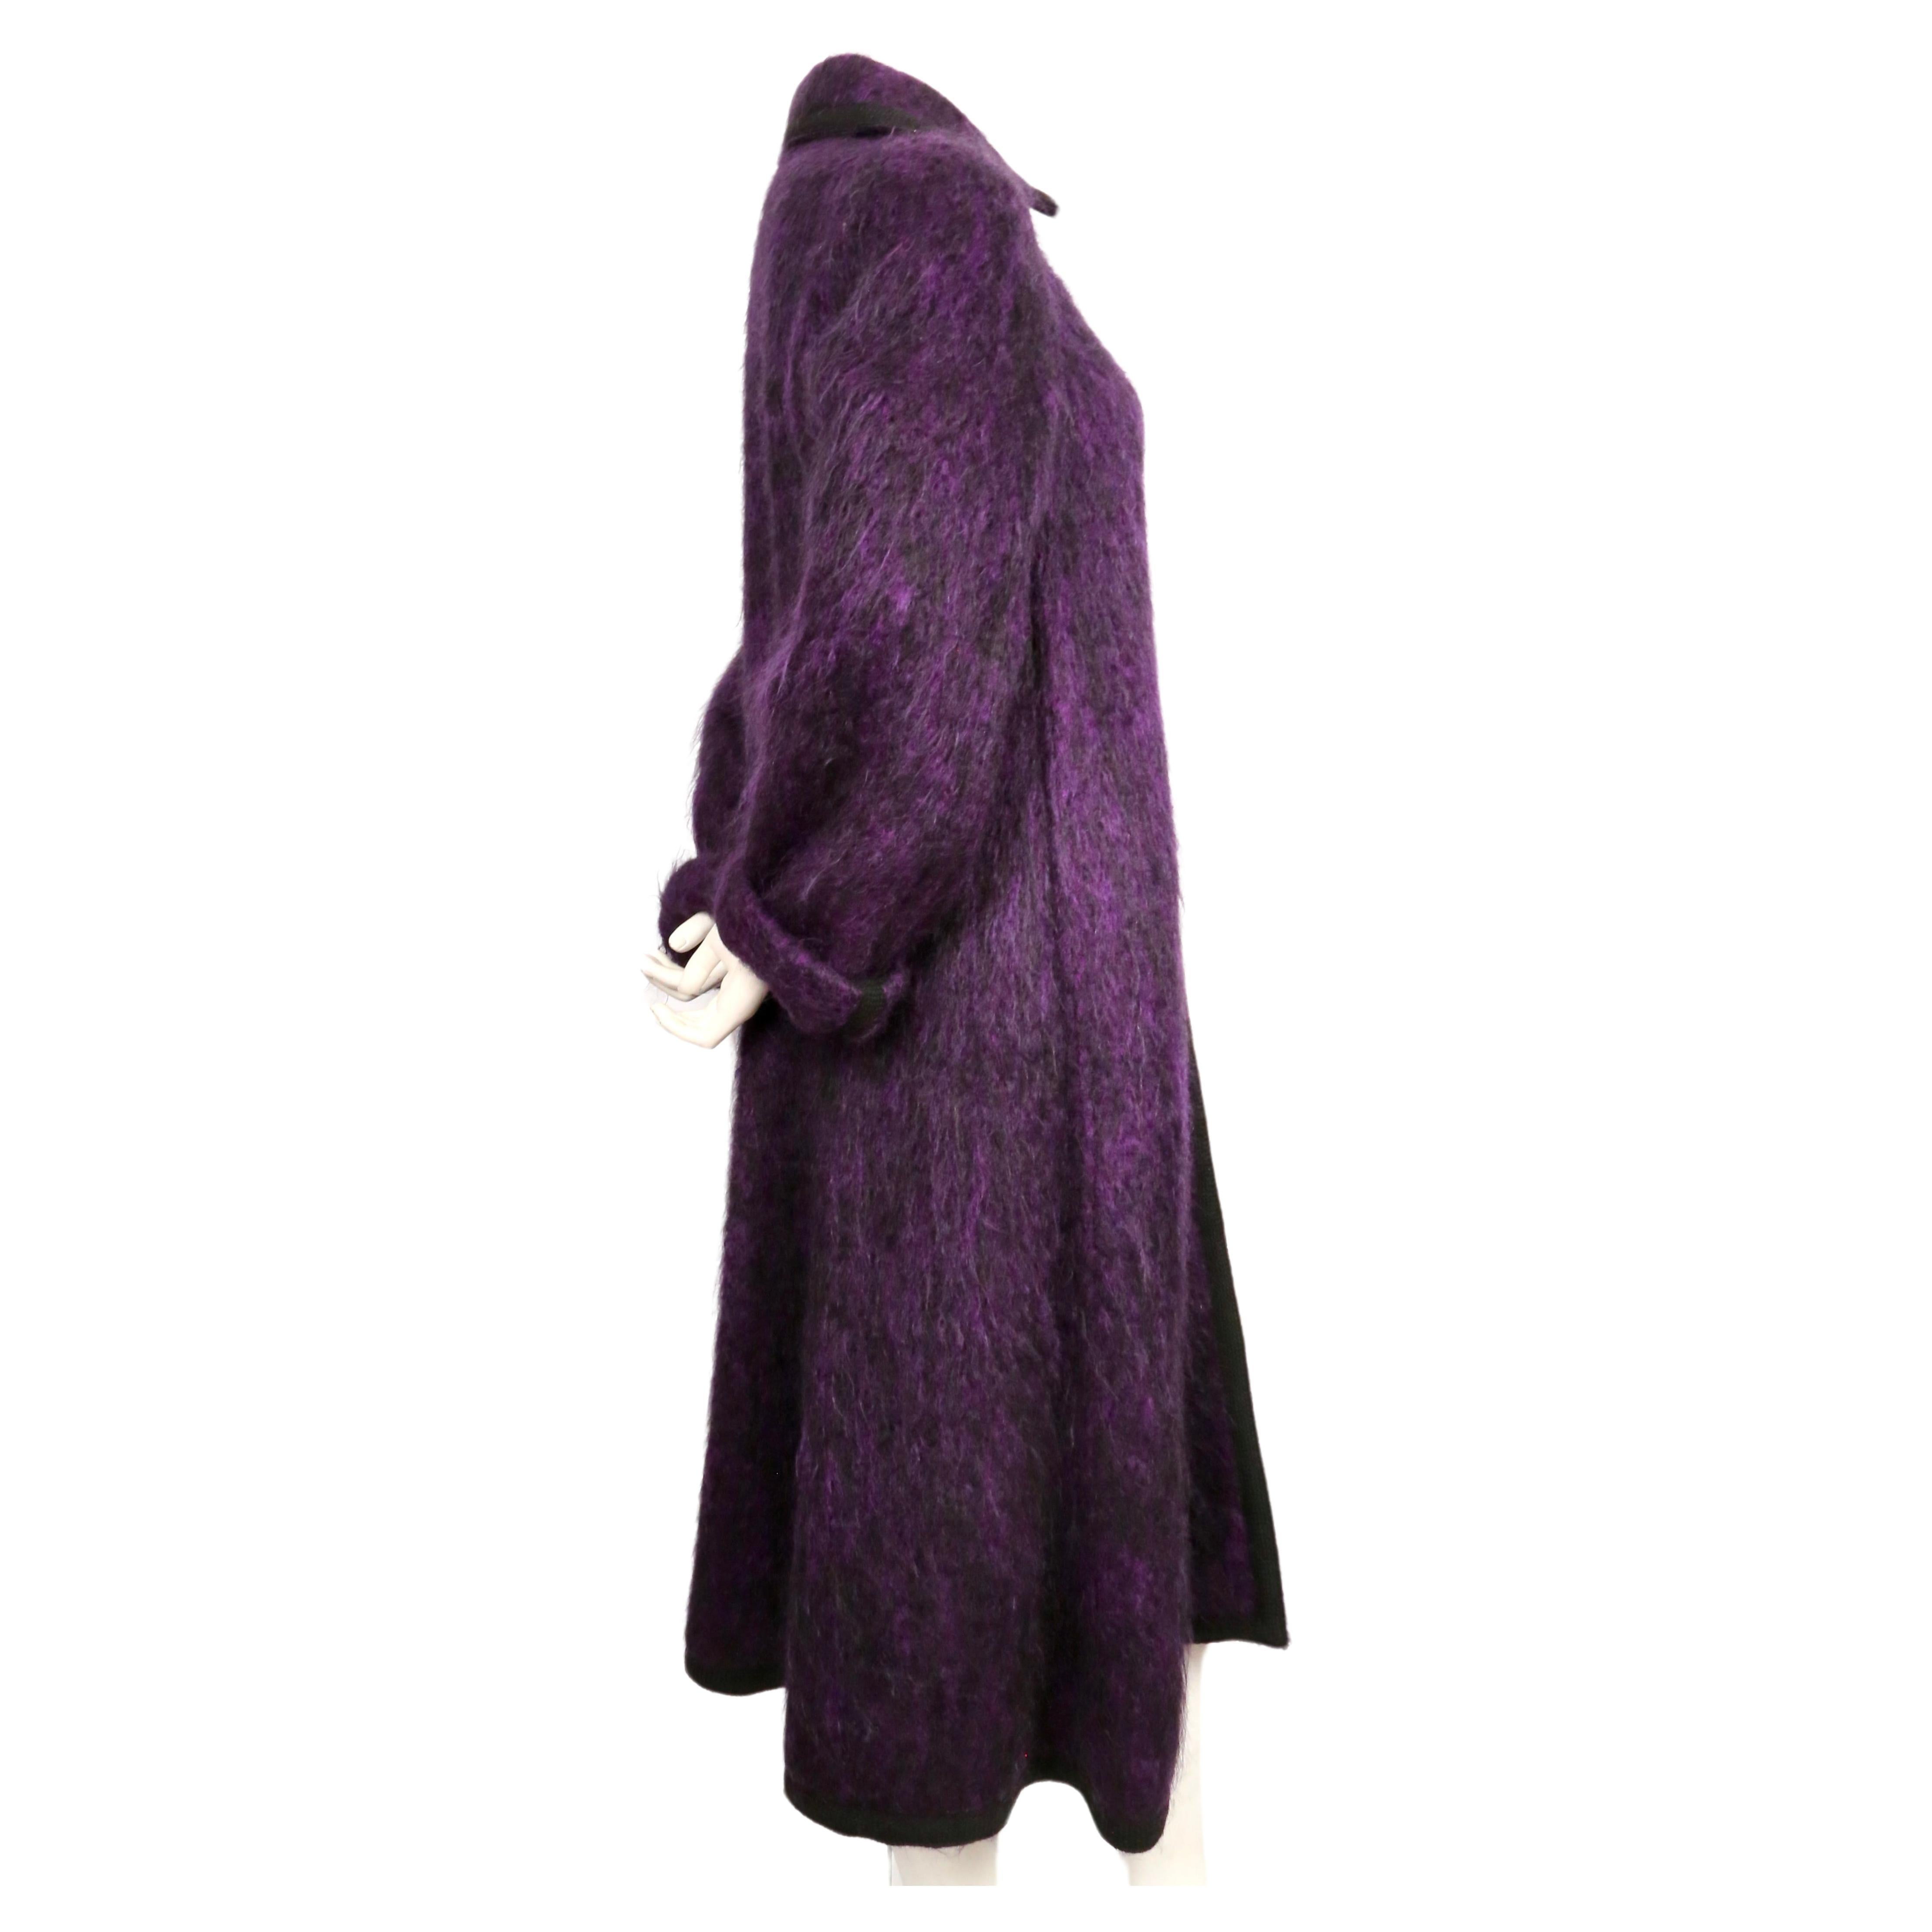 1960's YVES SAINT LAURENT violet purple brushed wool coat with braided trim For Sale 2